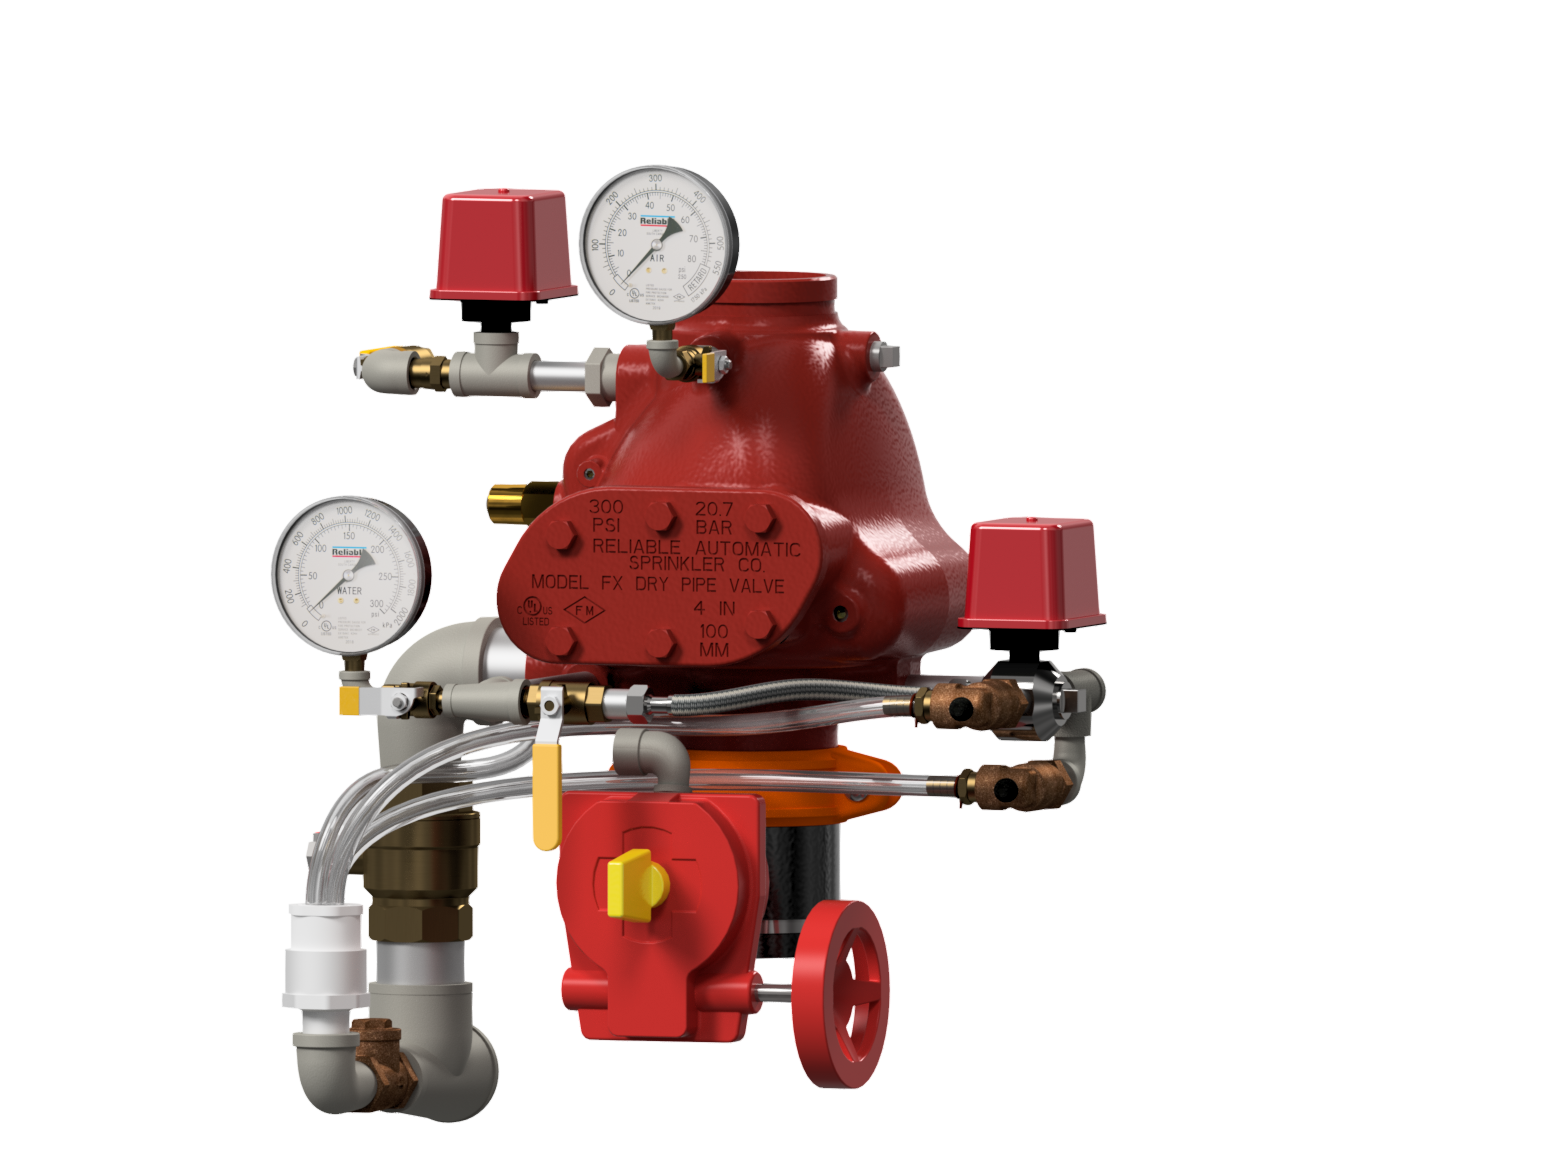 Reliable dry pipe valve